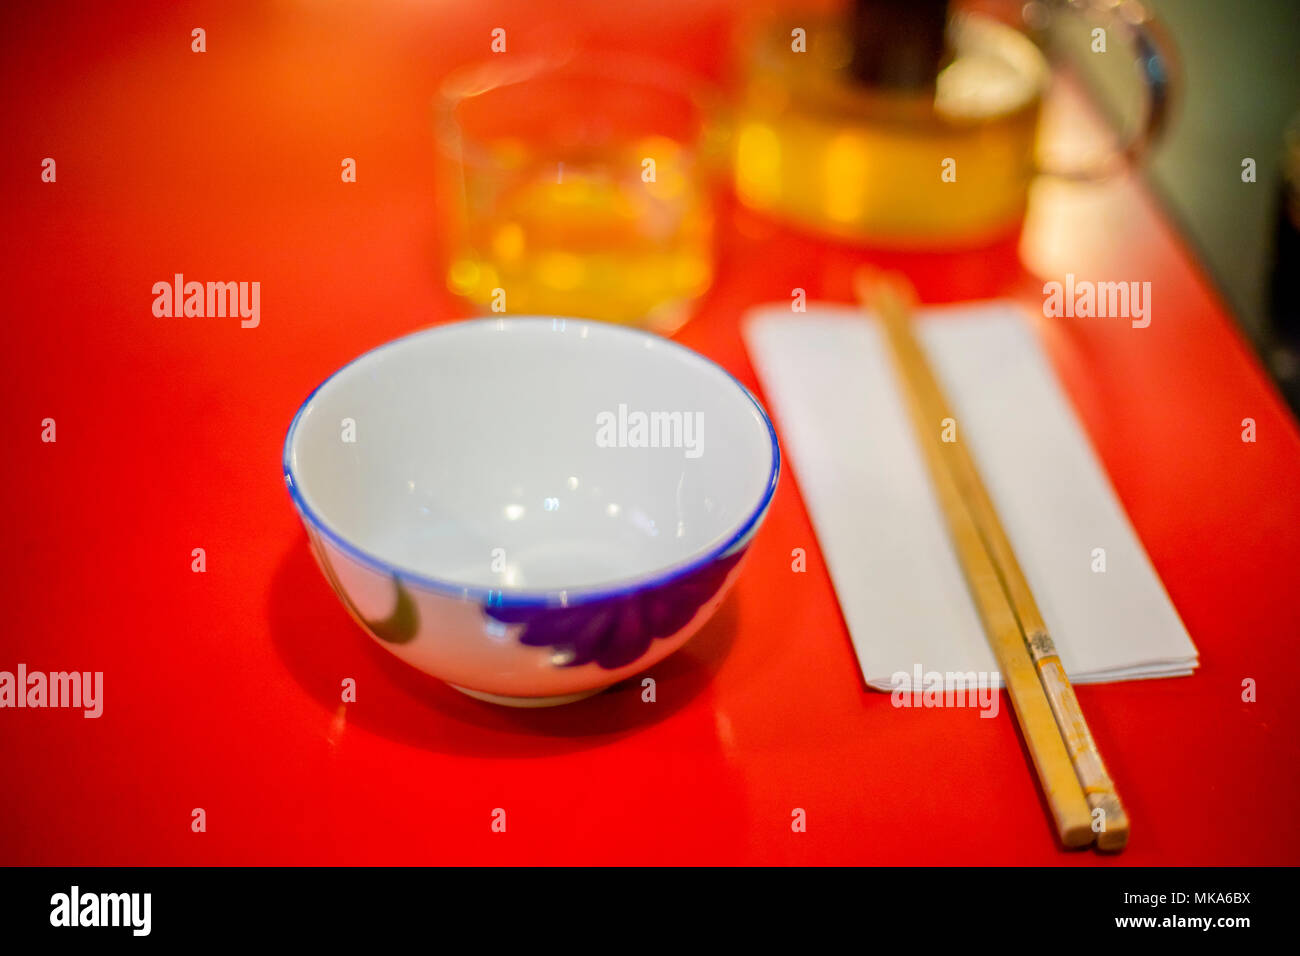 A Chinese table setting with empty rice bowl and wooden chop sticks, out of focus bokeh background Stock Photo